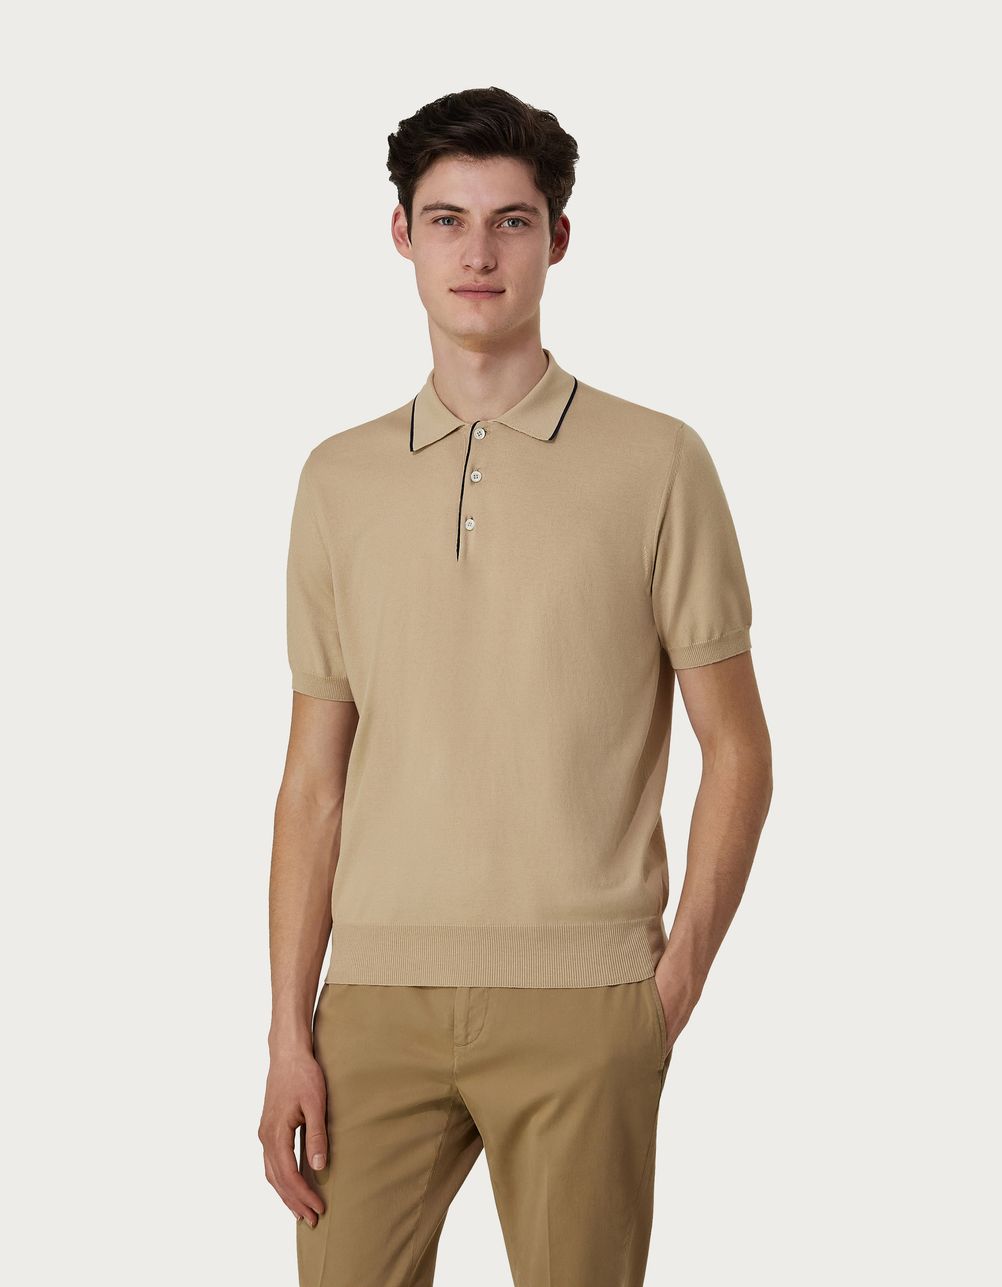 Blue and beige polo shirt in garment-dyed shaved cotton